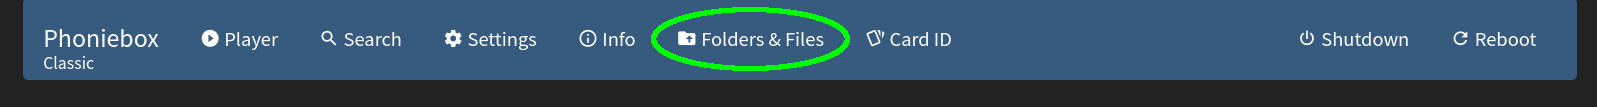 Navigate to the section where you can upload files and create folders